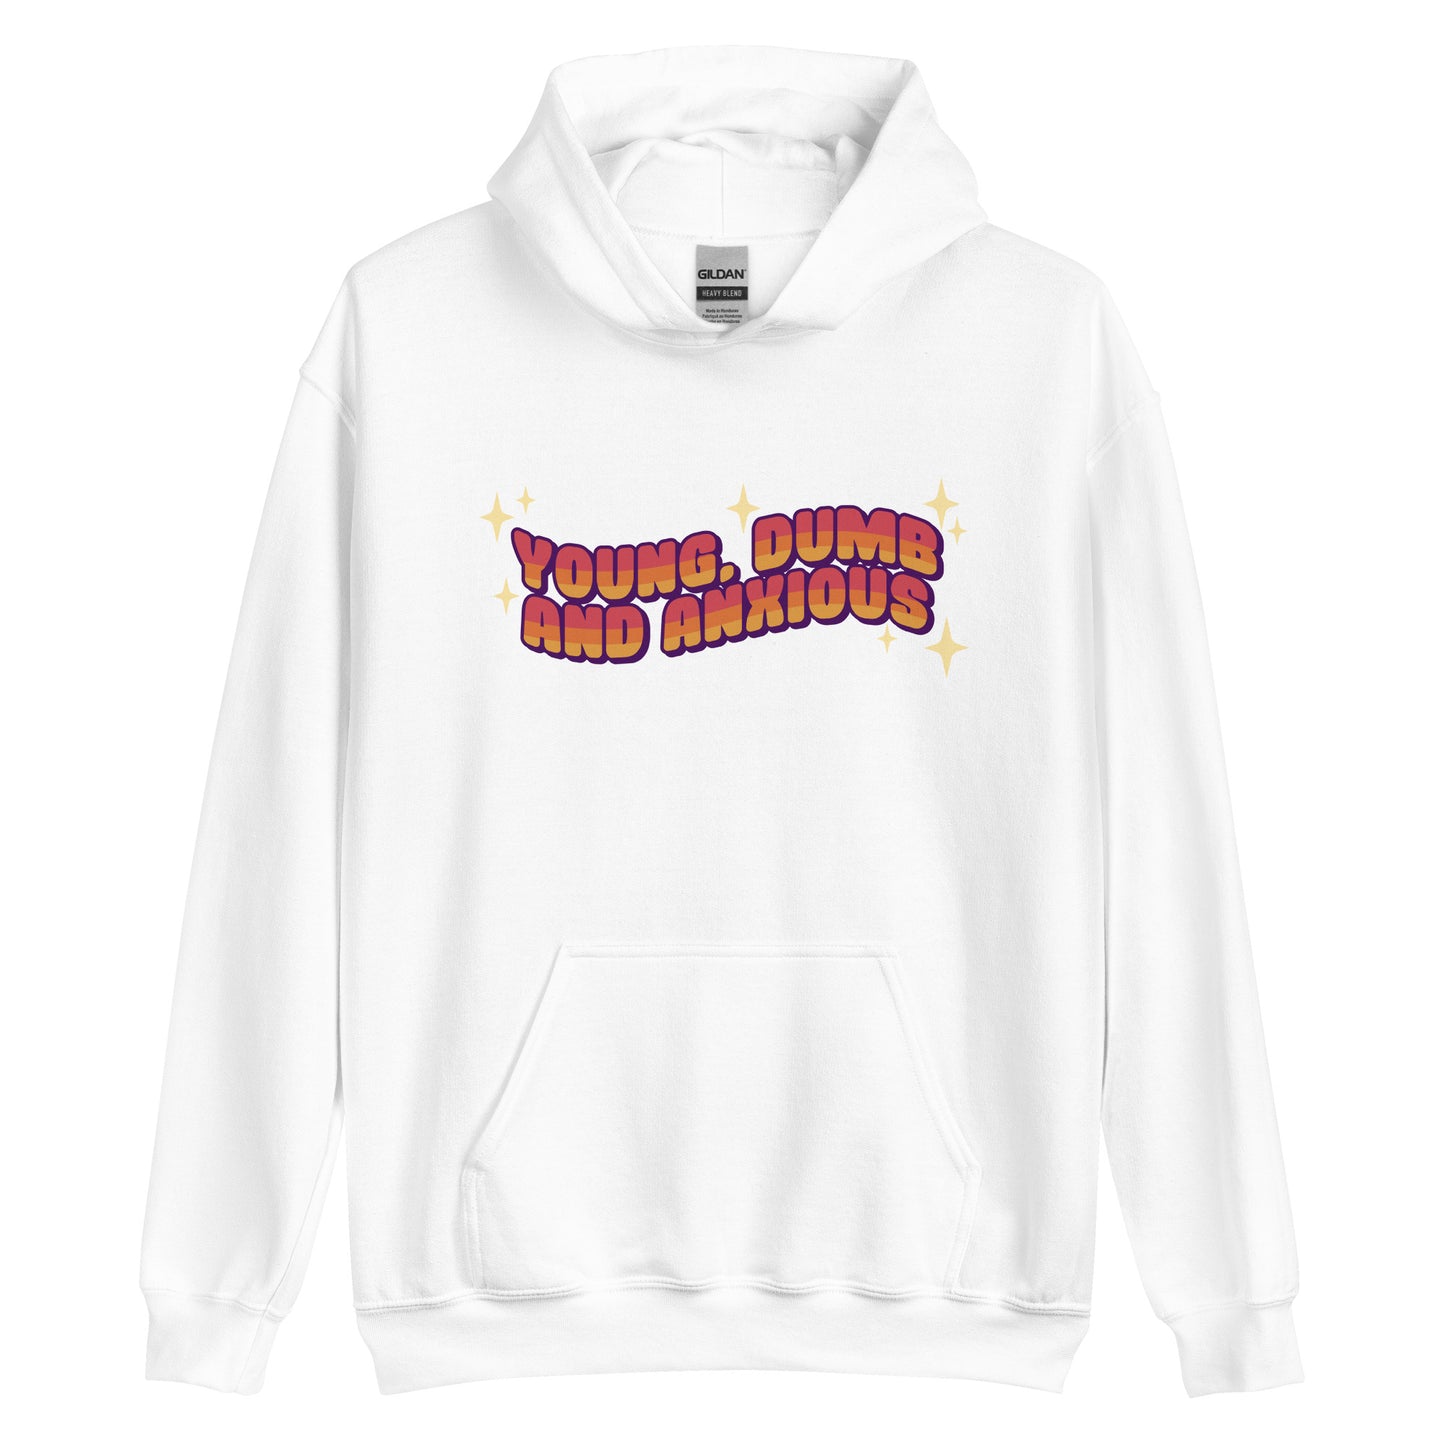 A white hooded sweatshirt featuring text in a pink-to-yellow gradient, surrounded by sparkles. The text reads "Young, dumb and anxious" in a blocky font.